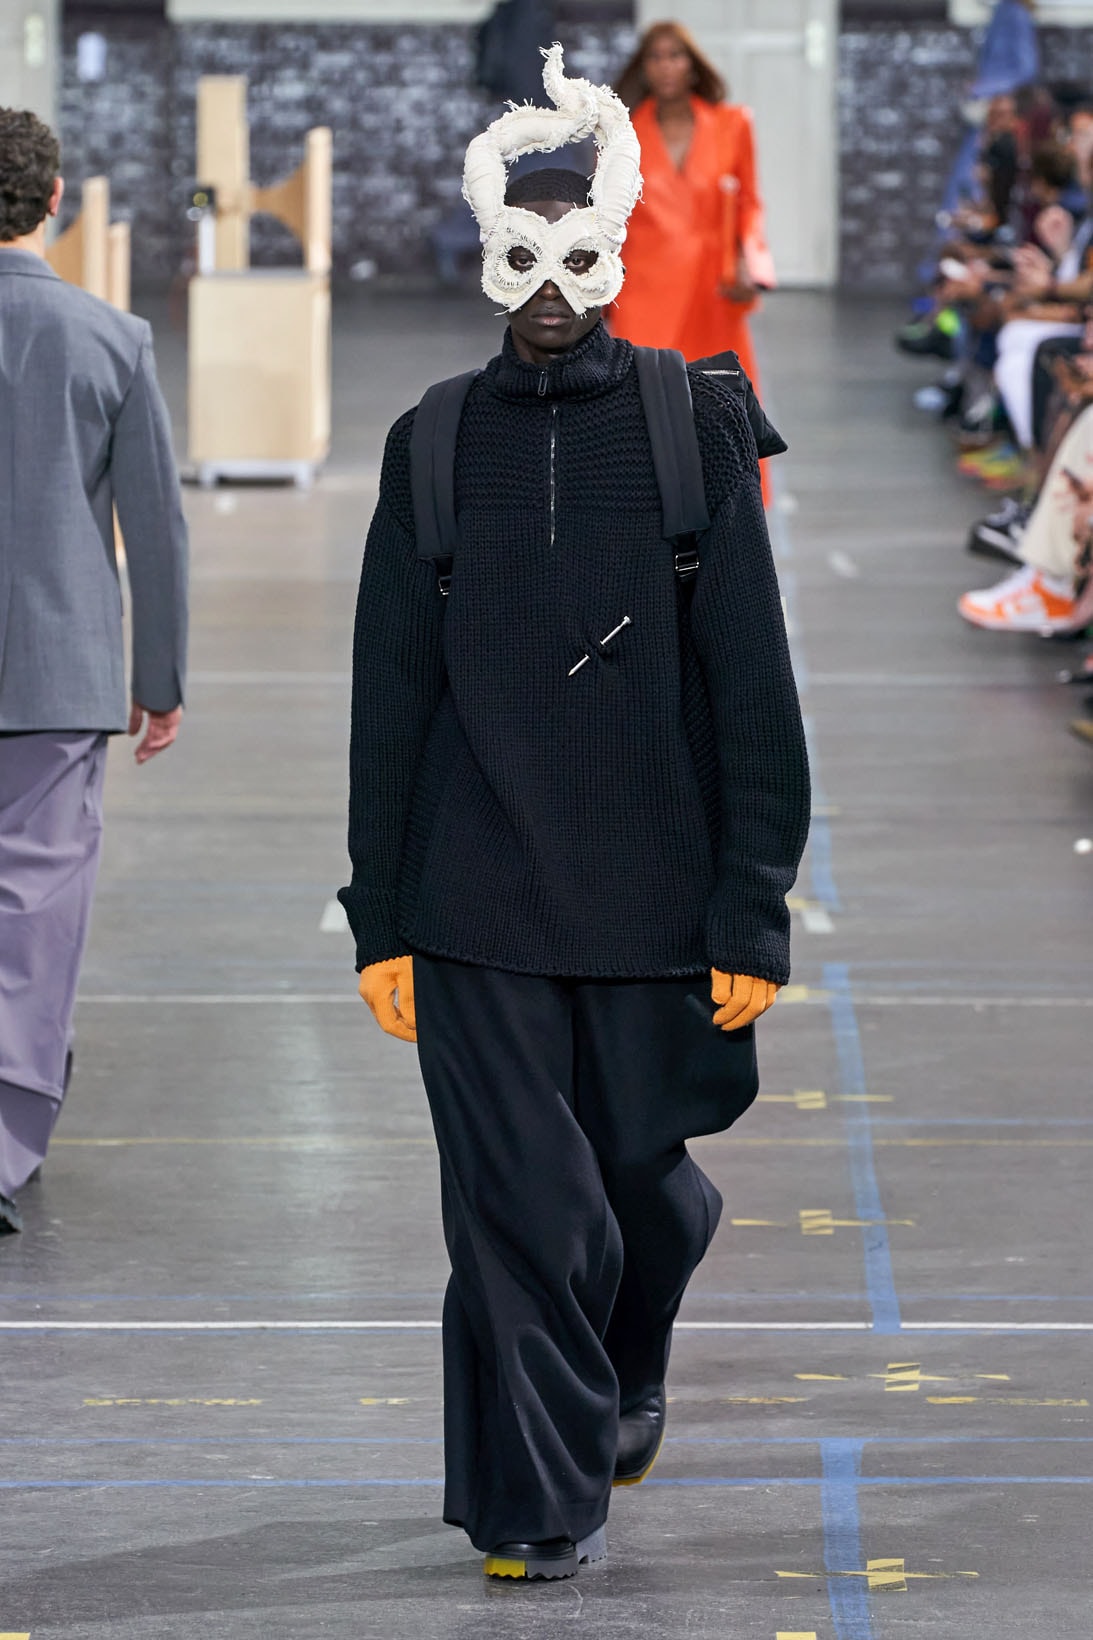 Virgil Abloh at Off-White Fall Winter 2021 Runway Show - “Laboratory of  Fun” / id : 4368502 by